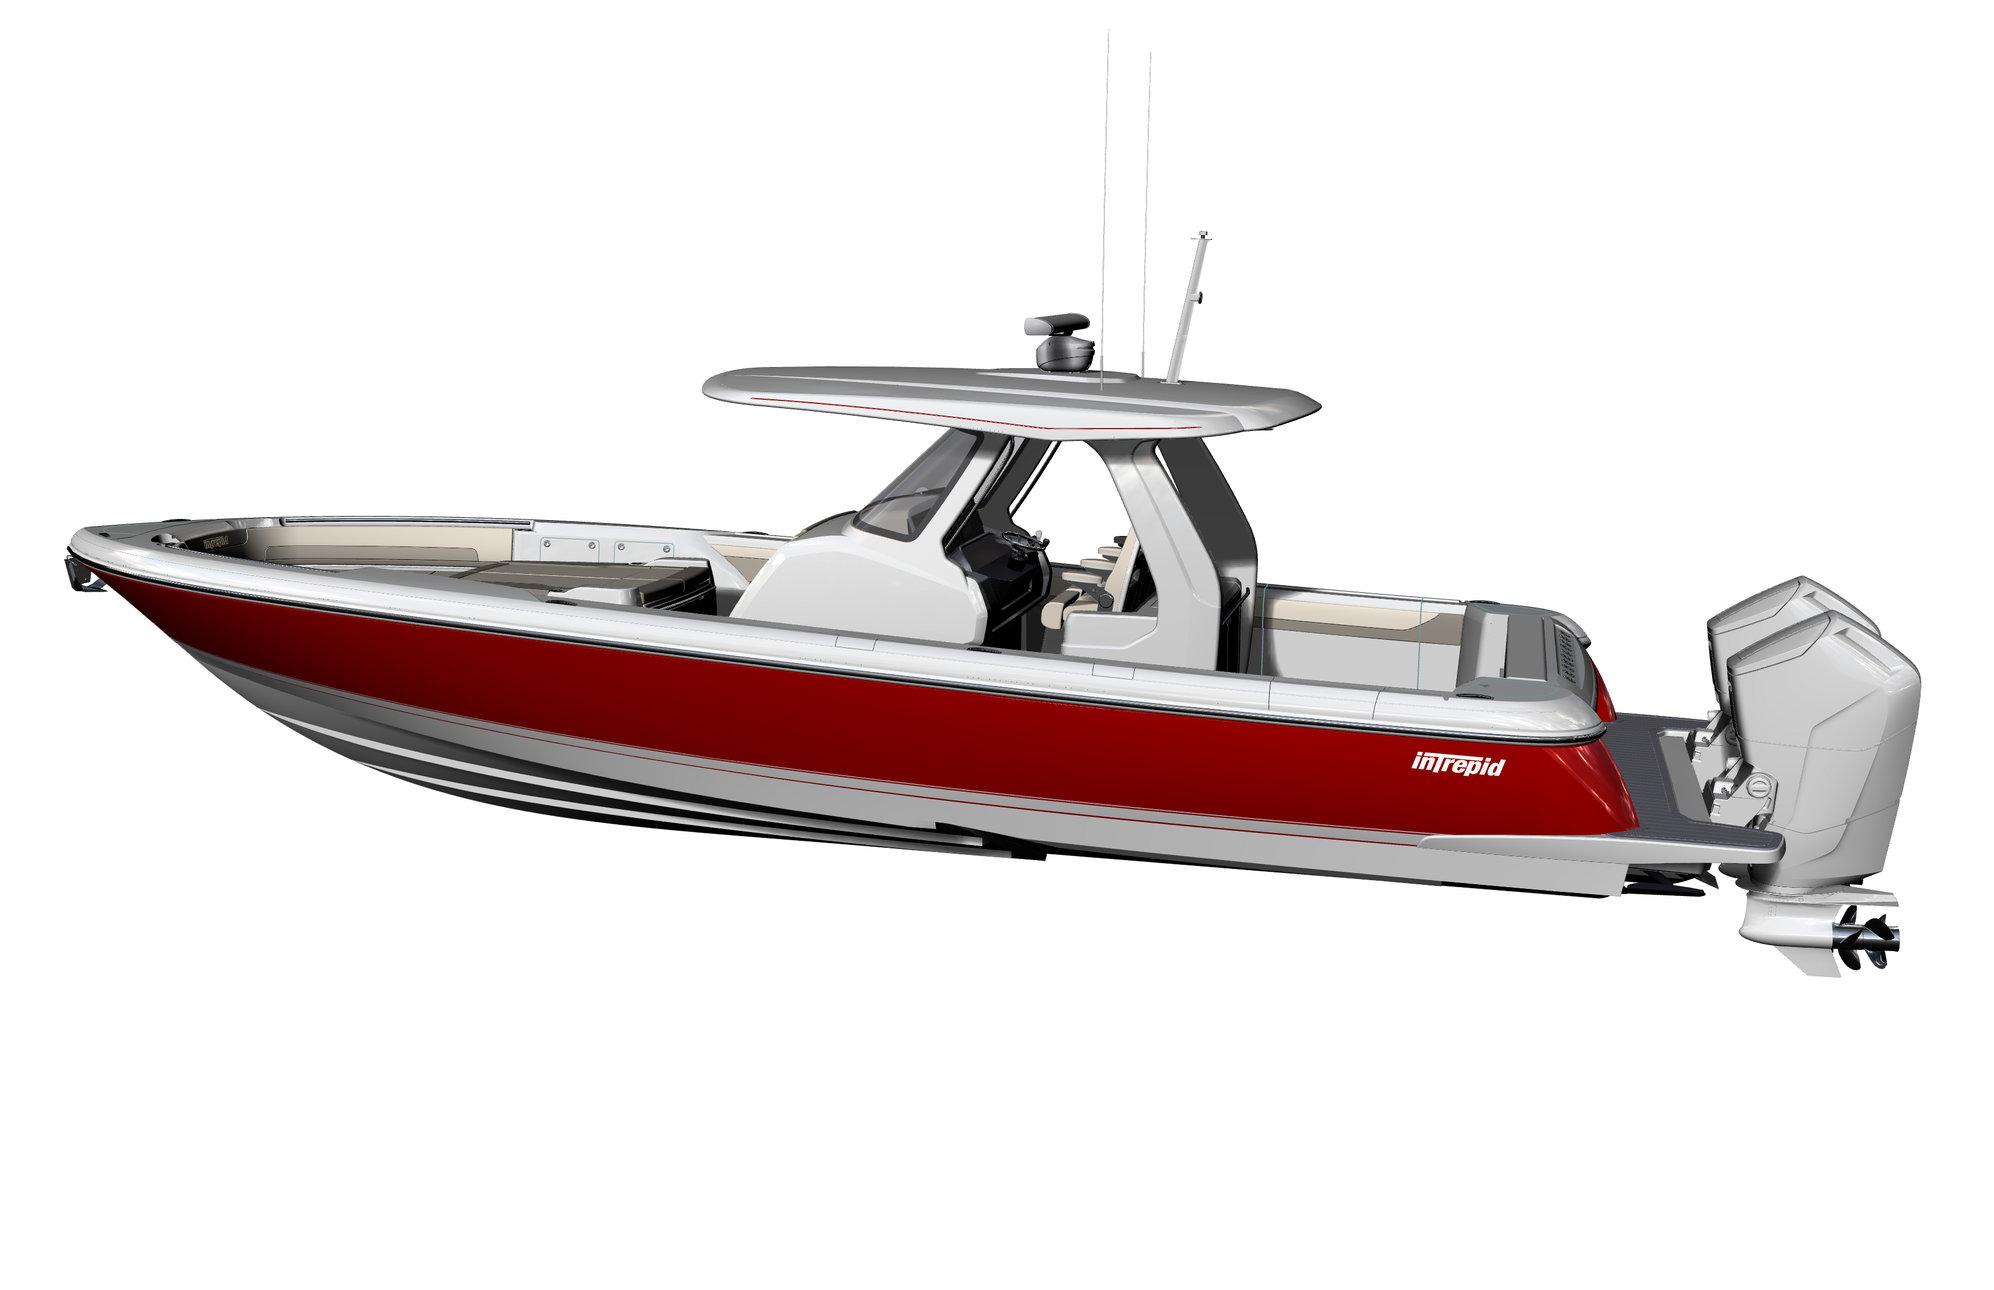 Zeebaas Zx27 The Hull Truth Boating And Fishing Forum, 42% OFF